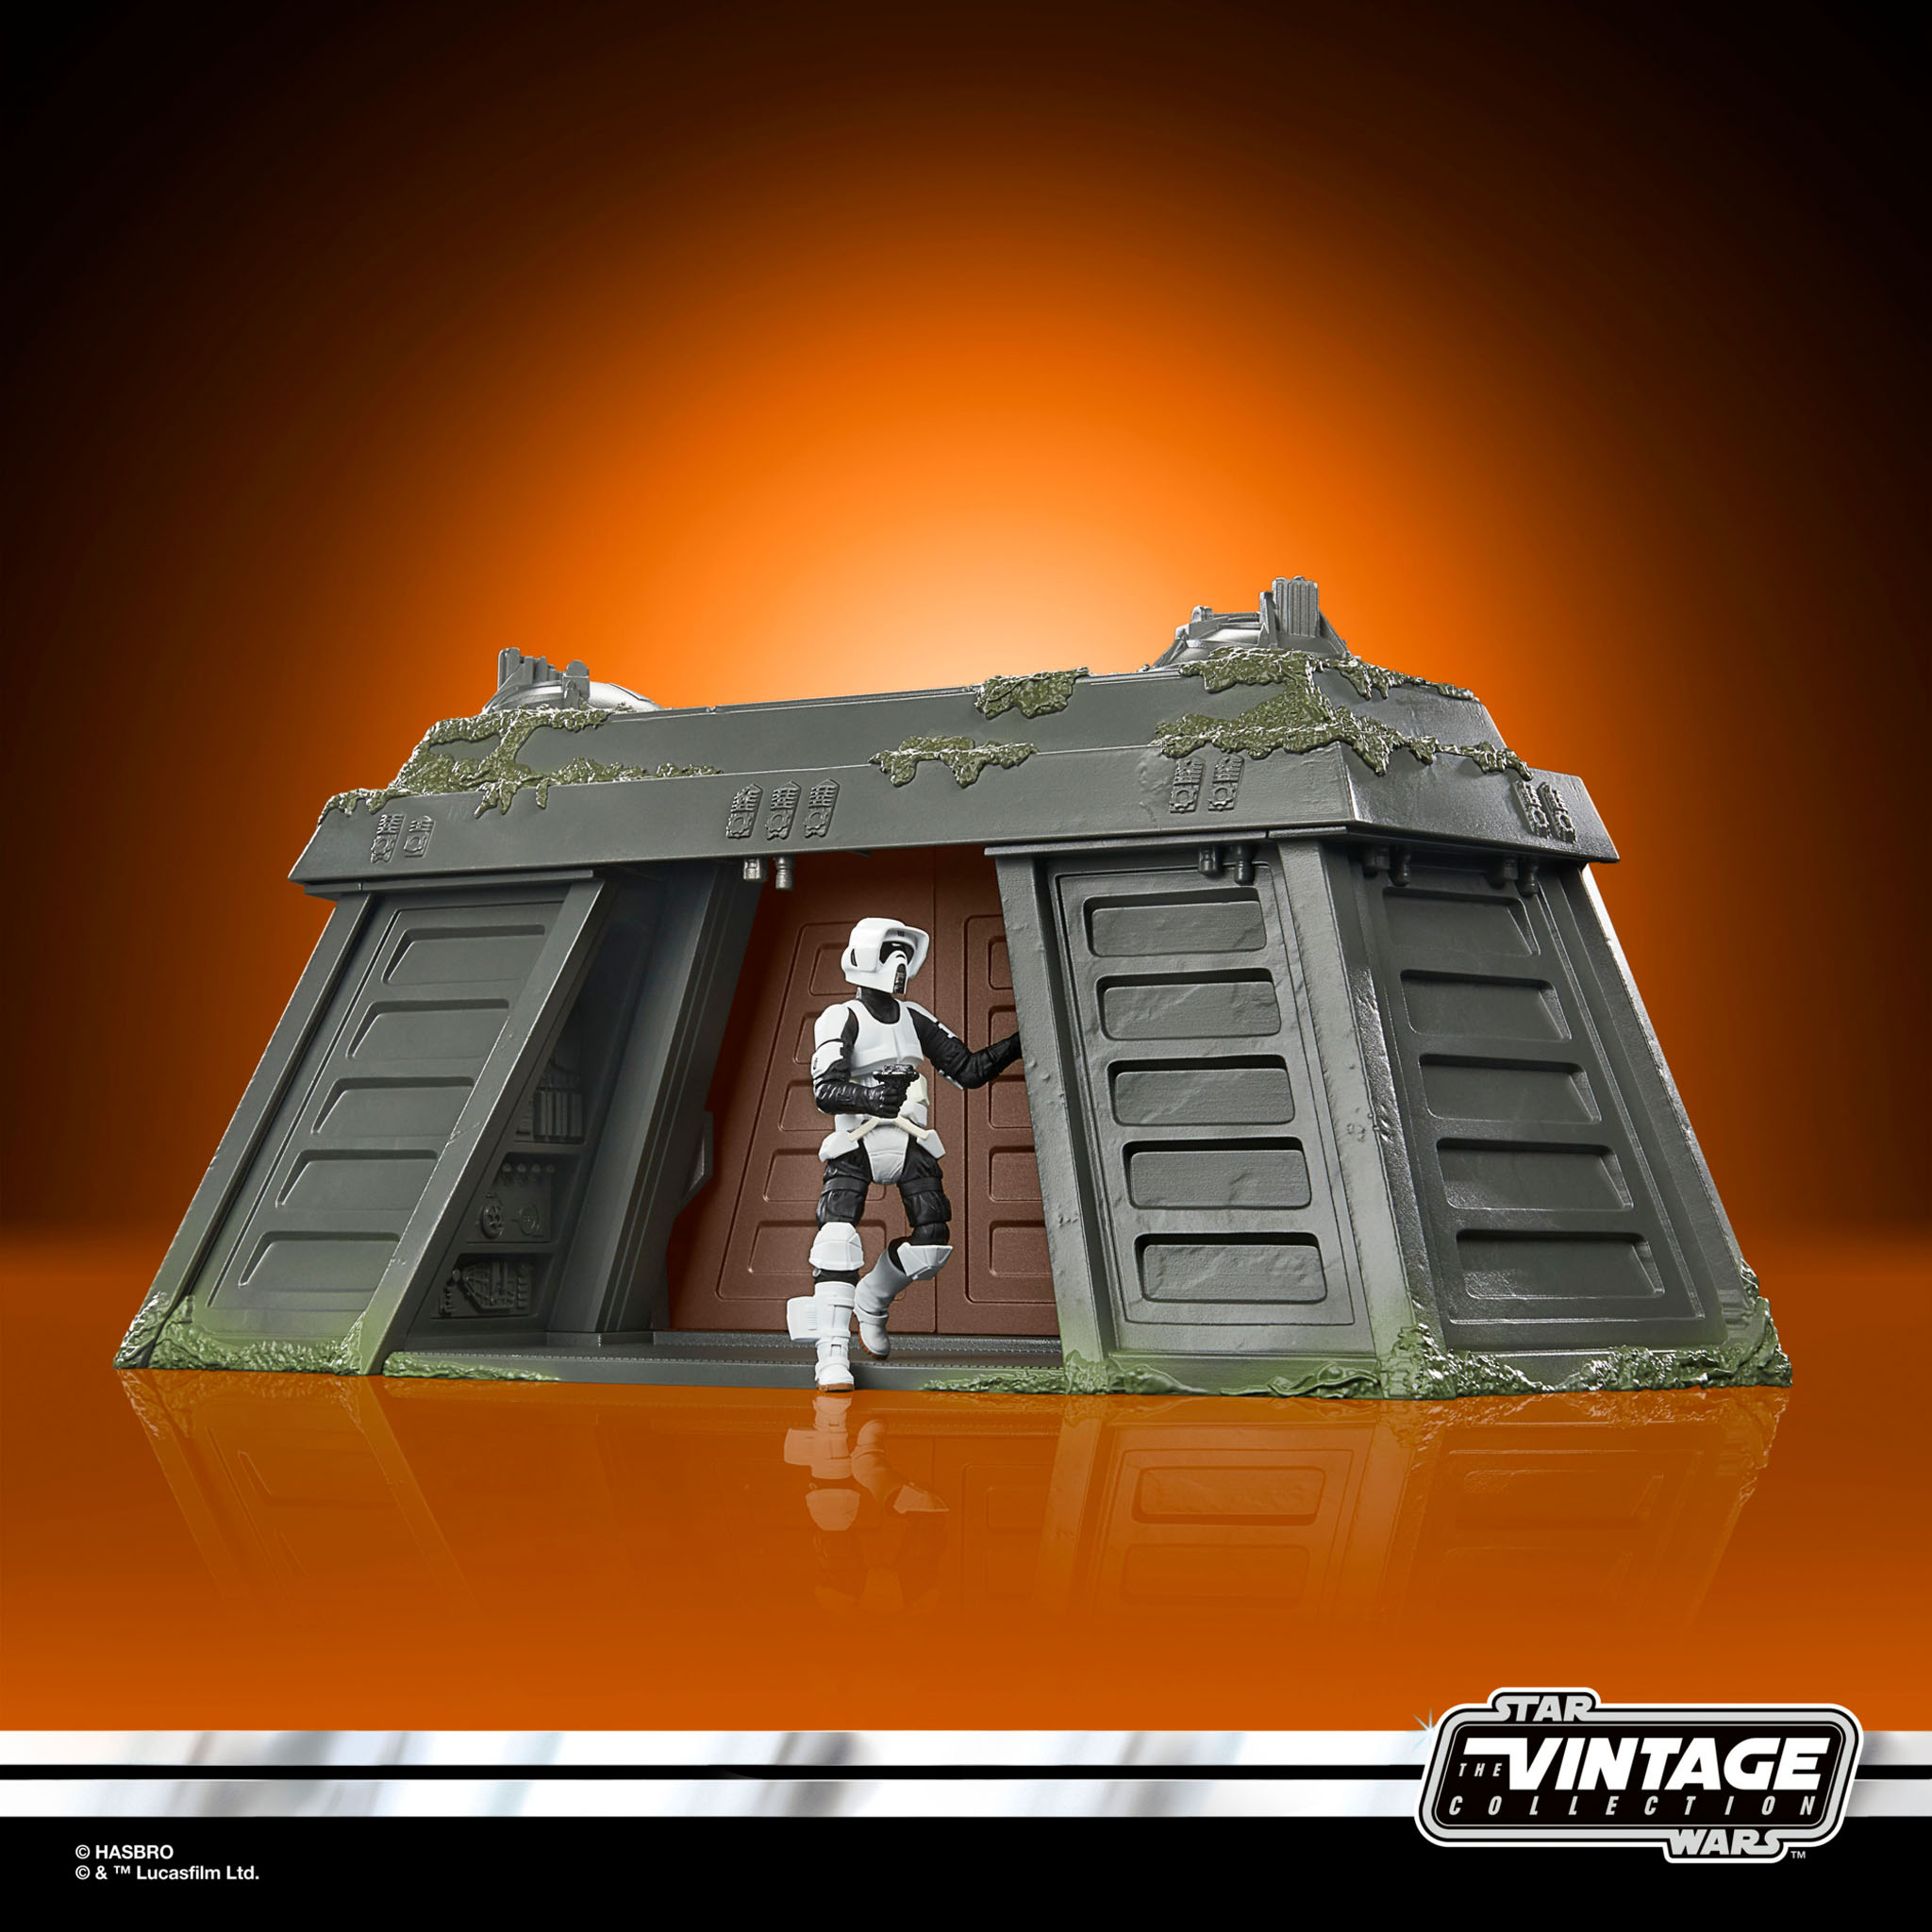 Star Wars Vintage Collection: New playset and vehicle revealed